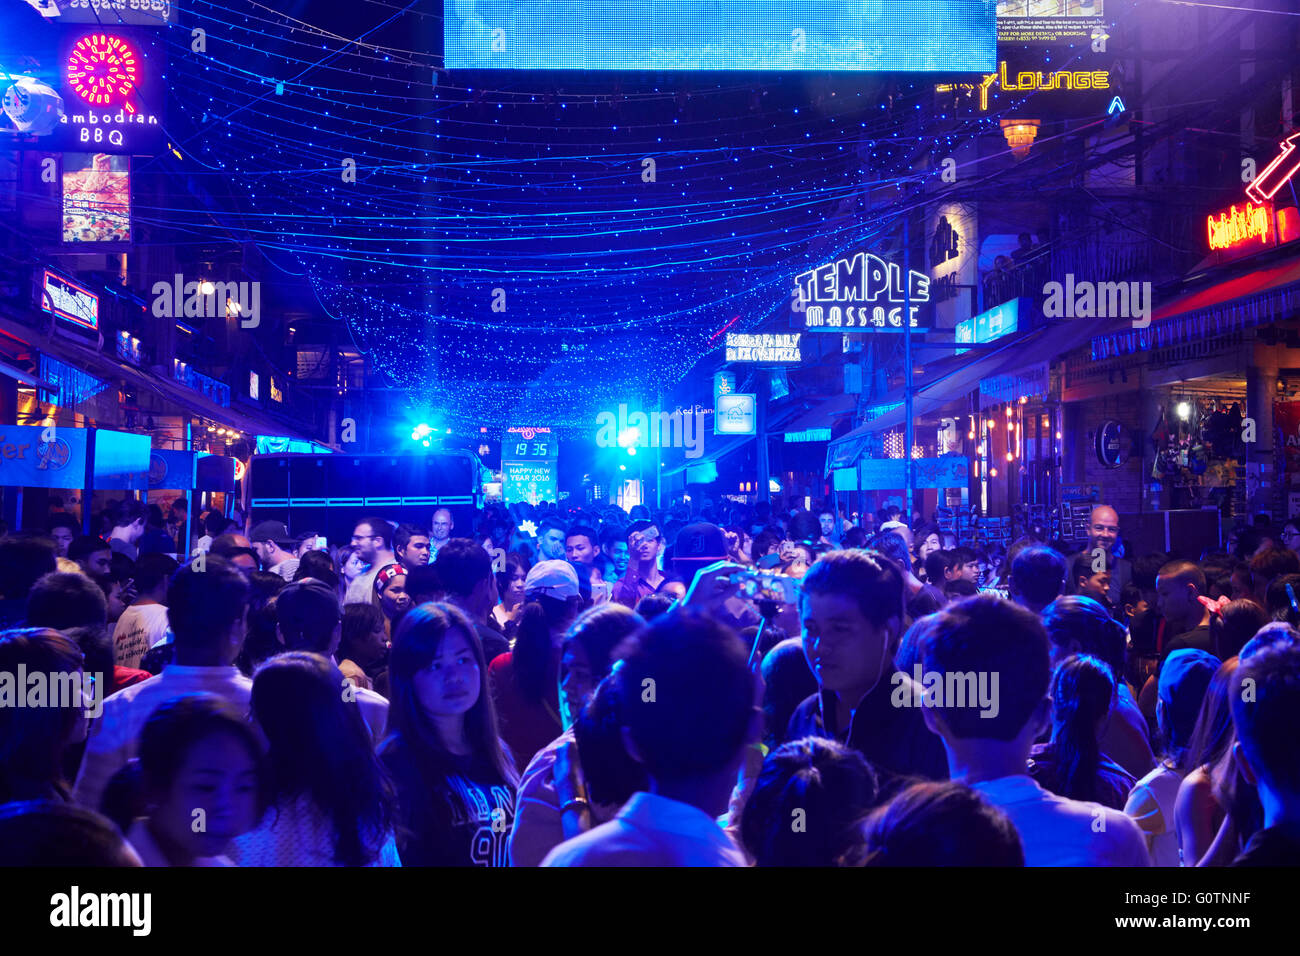 New Year's Eve Party in Pub Street, Siem Reap, Cambodia Stock Photo